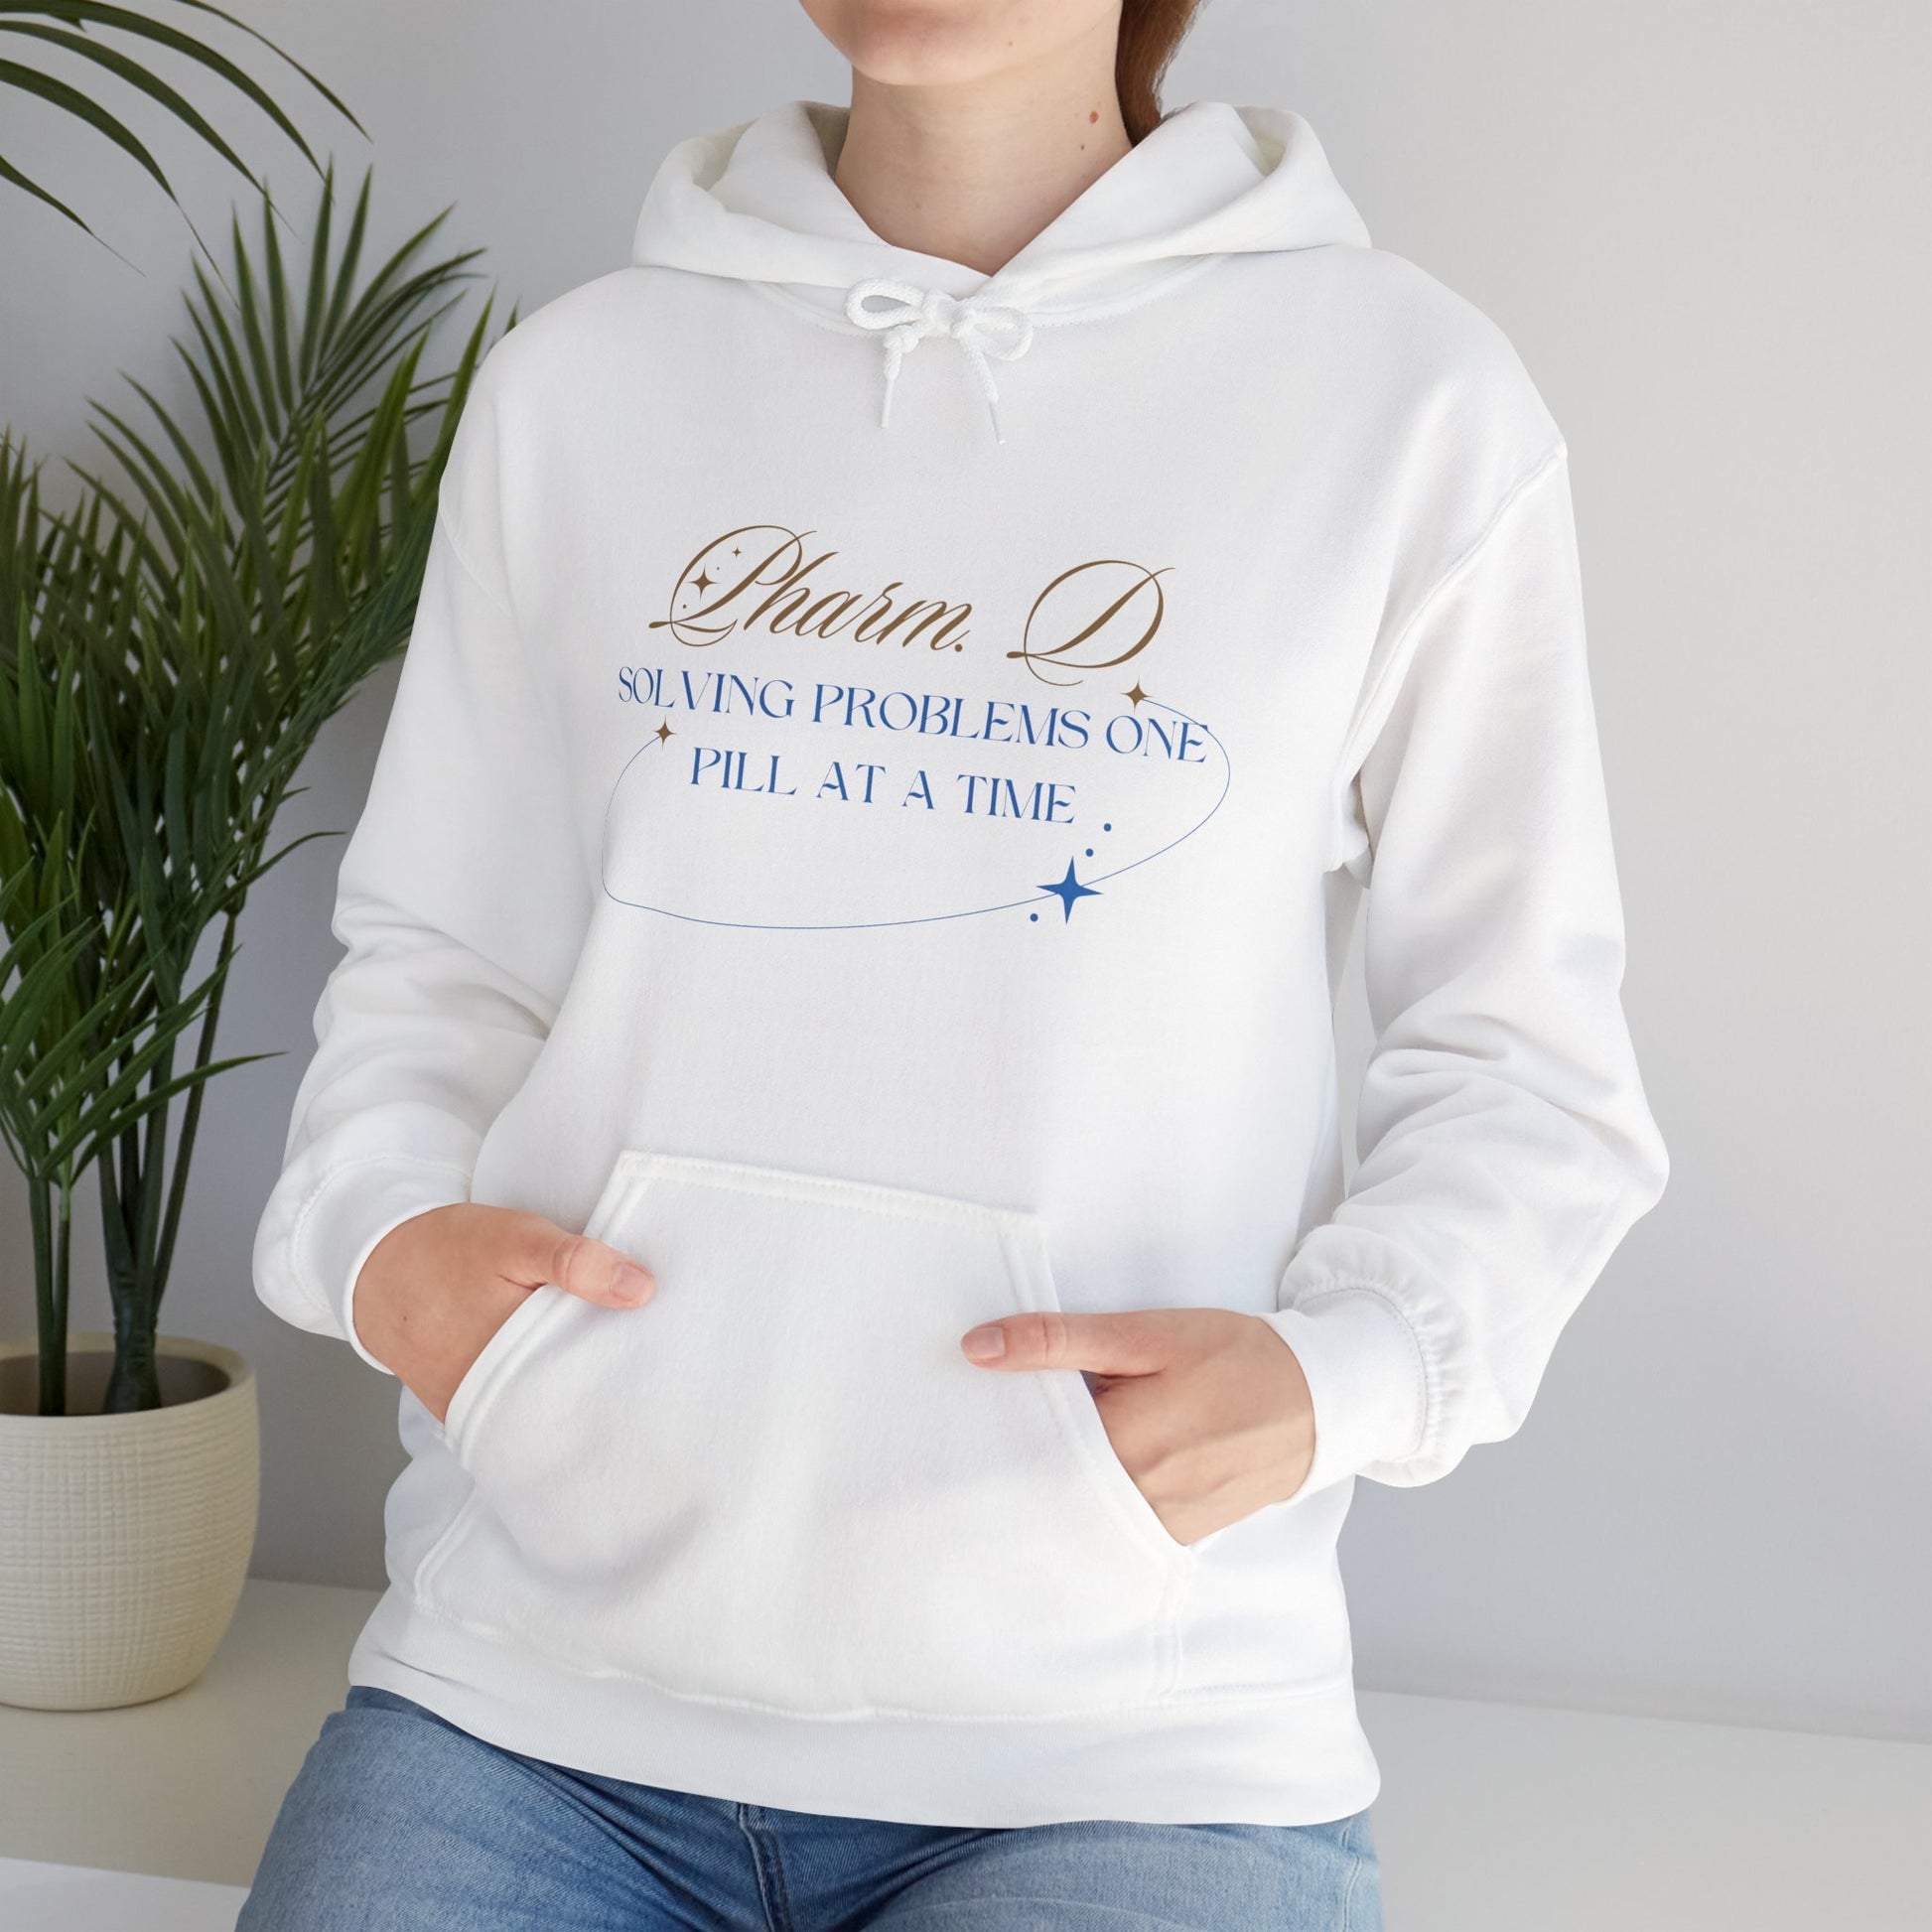 Hoodies with Doctor of pharmacy Credentials